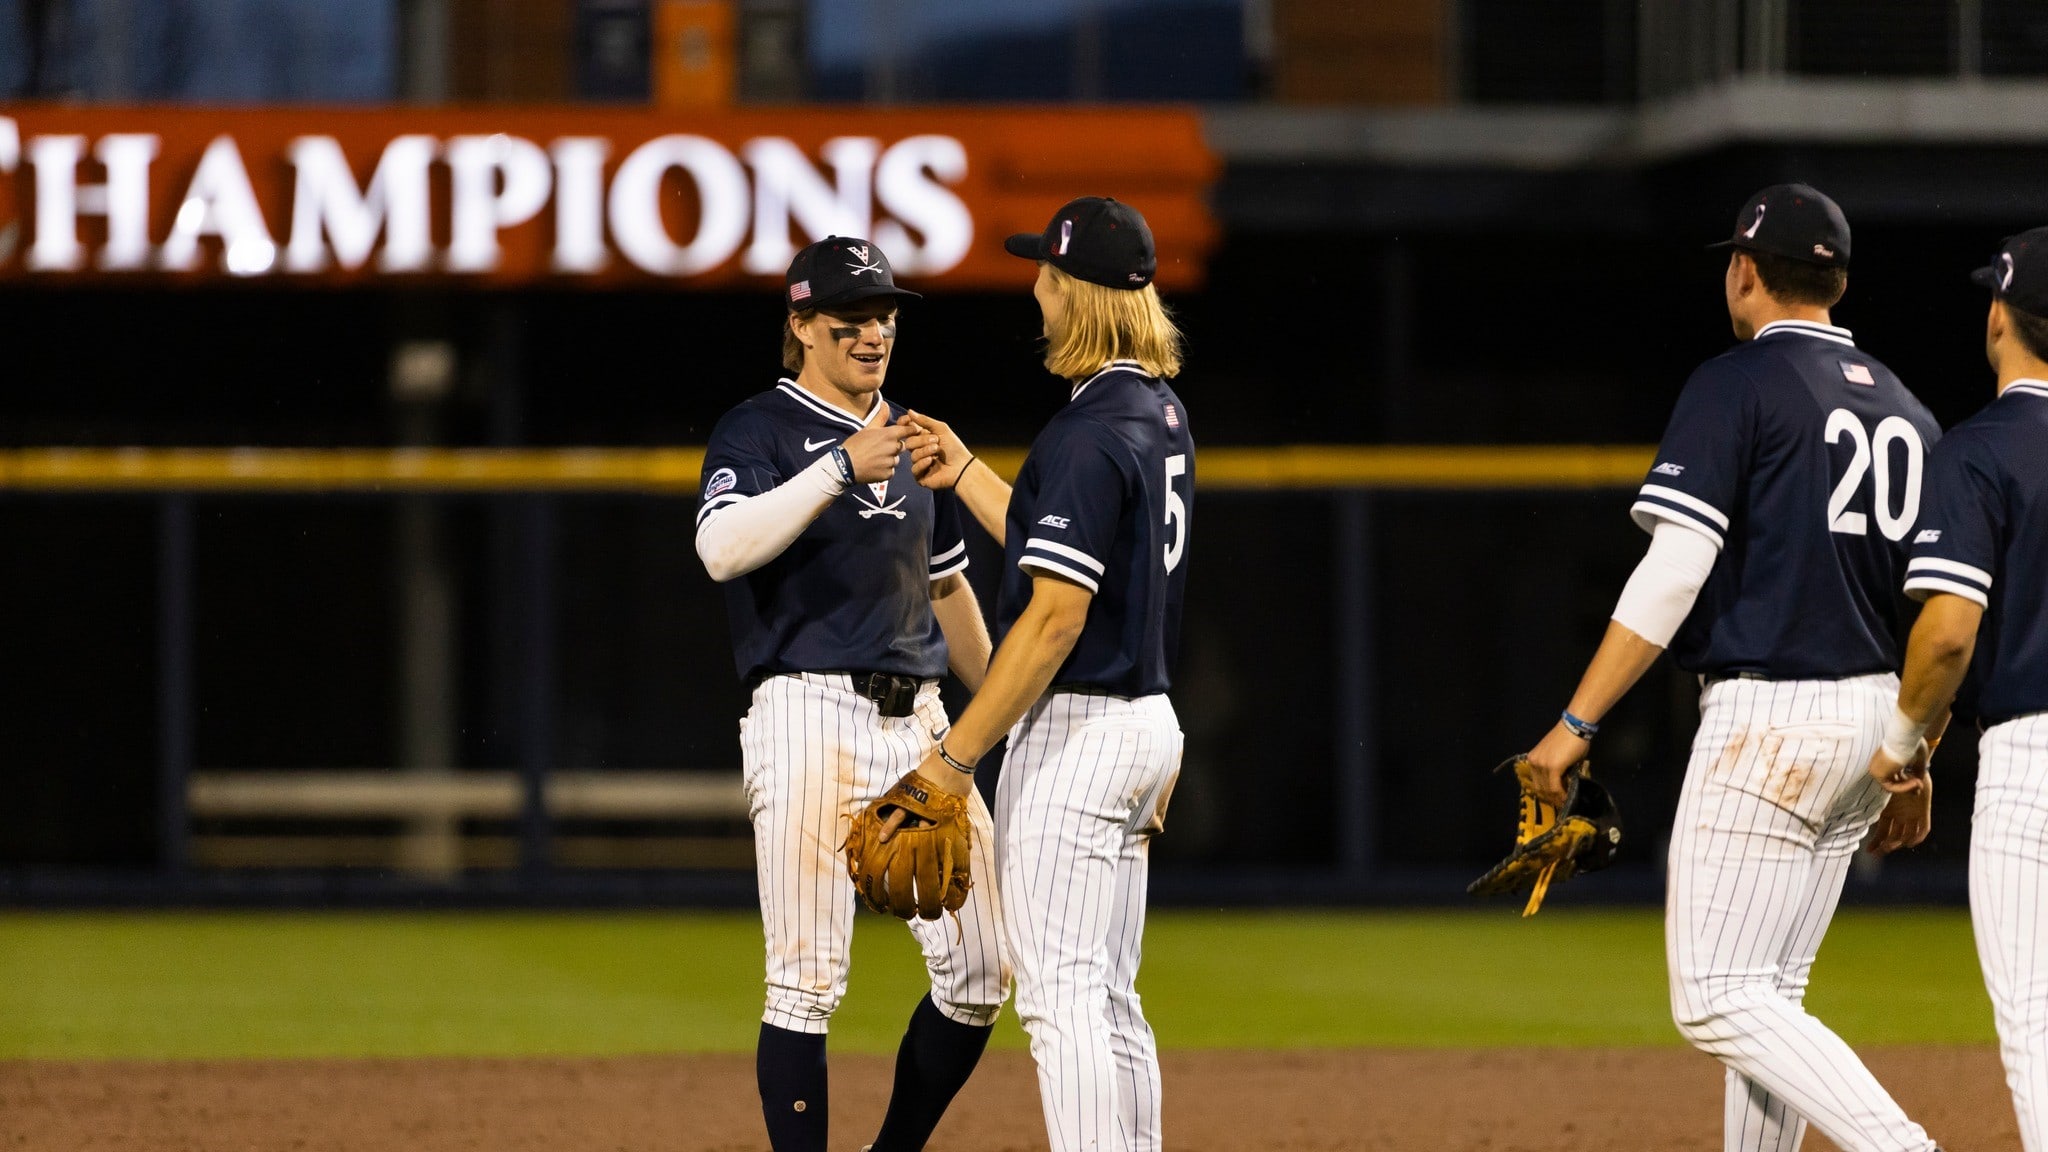 Griff O'Ferrall and Luke Hanson celebrate after Virginia baseball defeated Richmond at Disharoon Park.